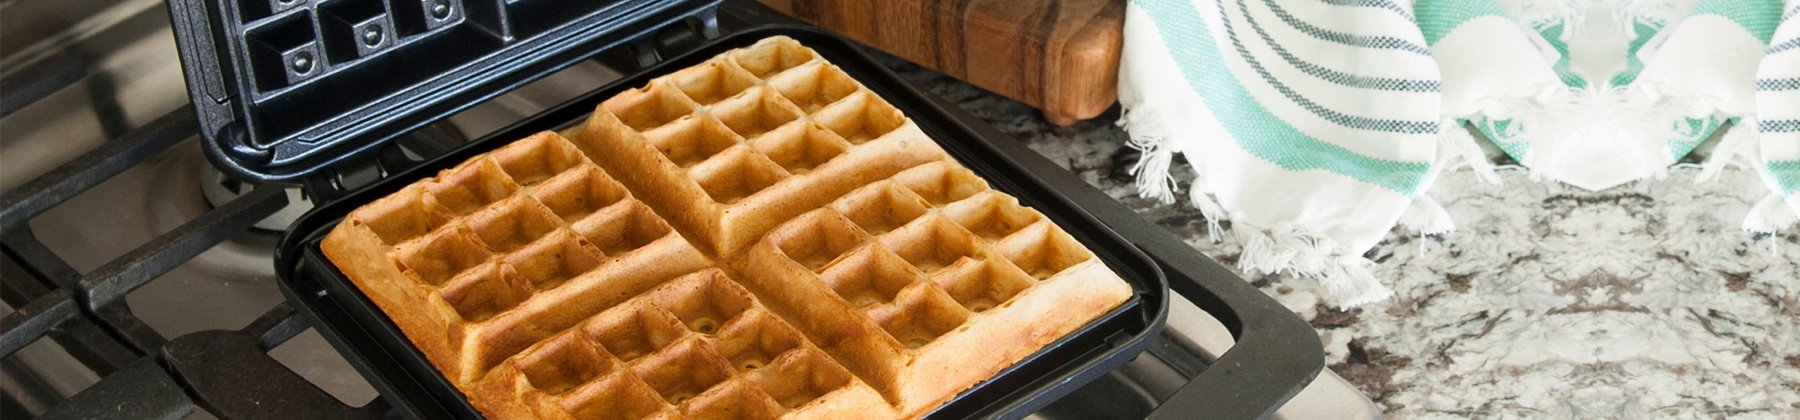 https://cdn.everythingkitchens.com/media/wysiwyg/images/Category_Headers/waffle-makers.jpg